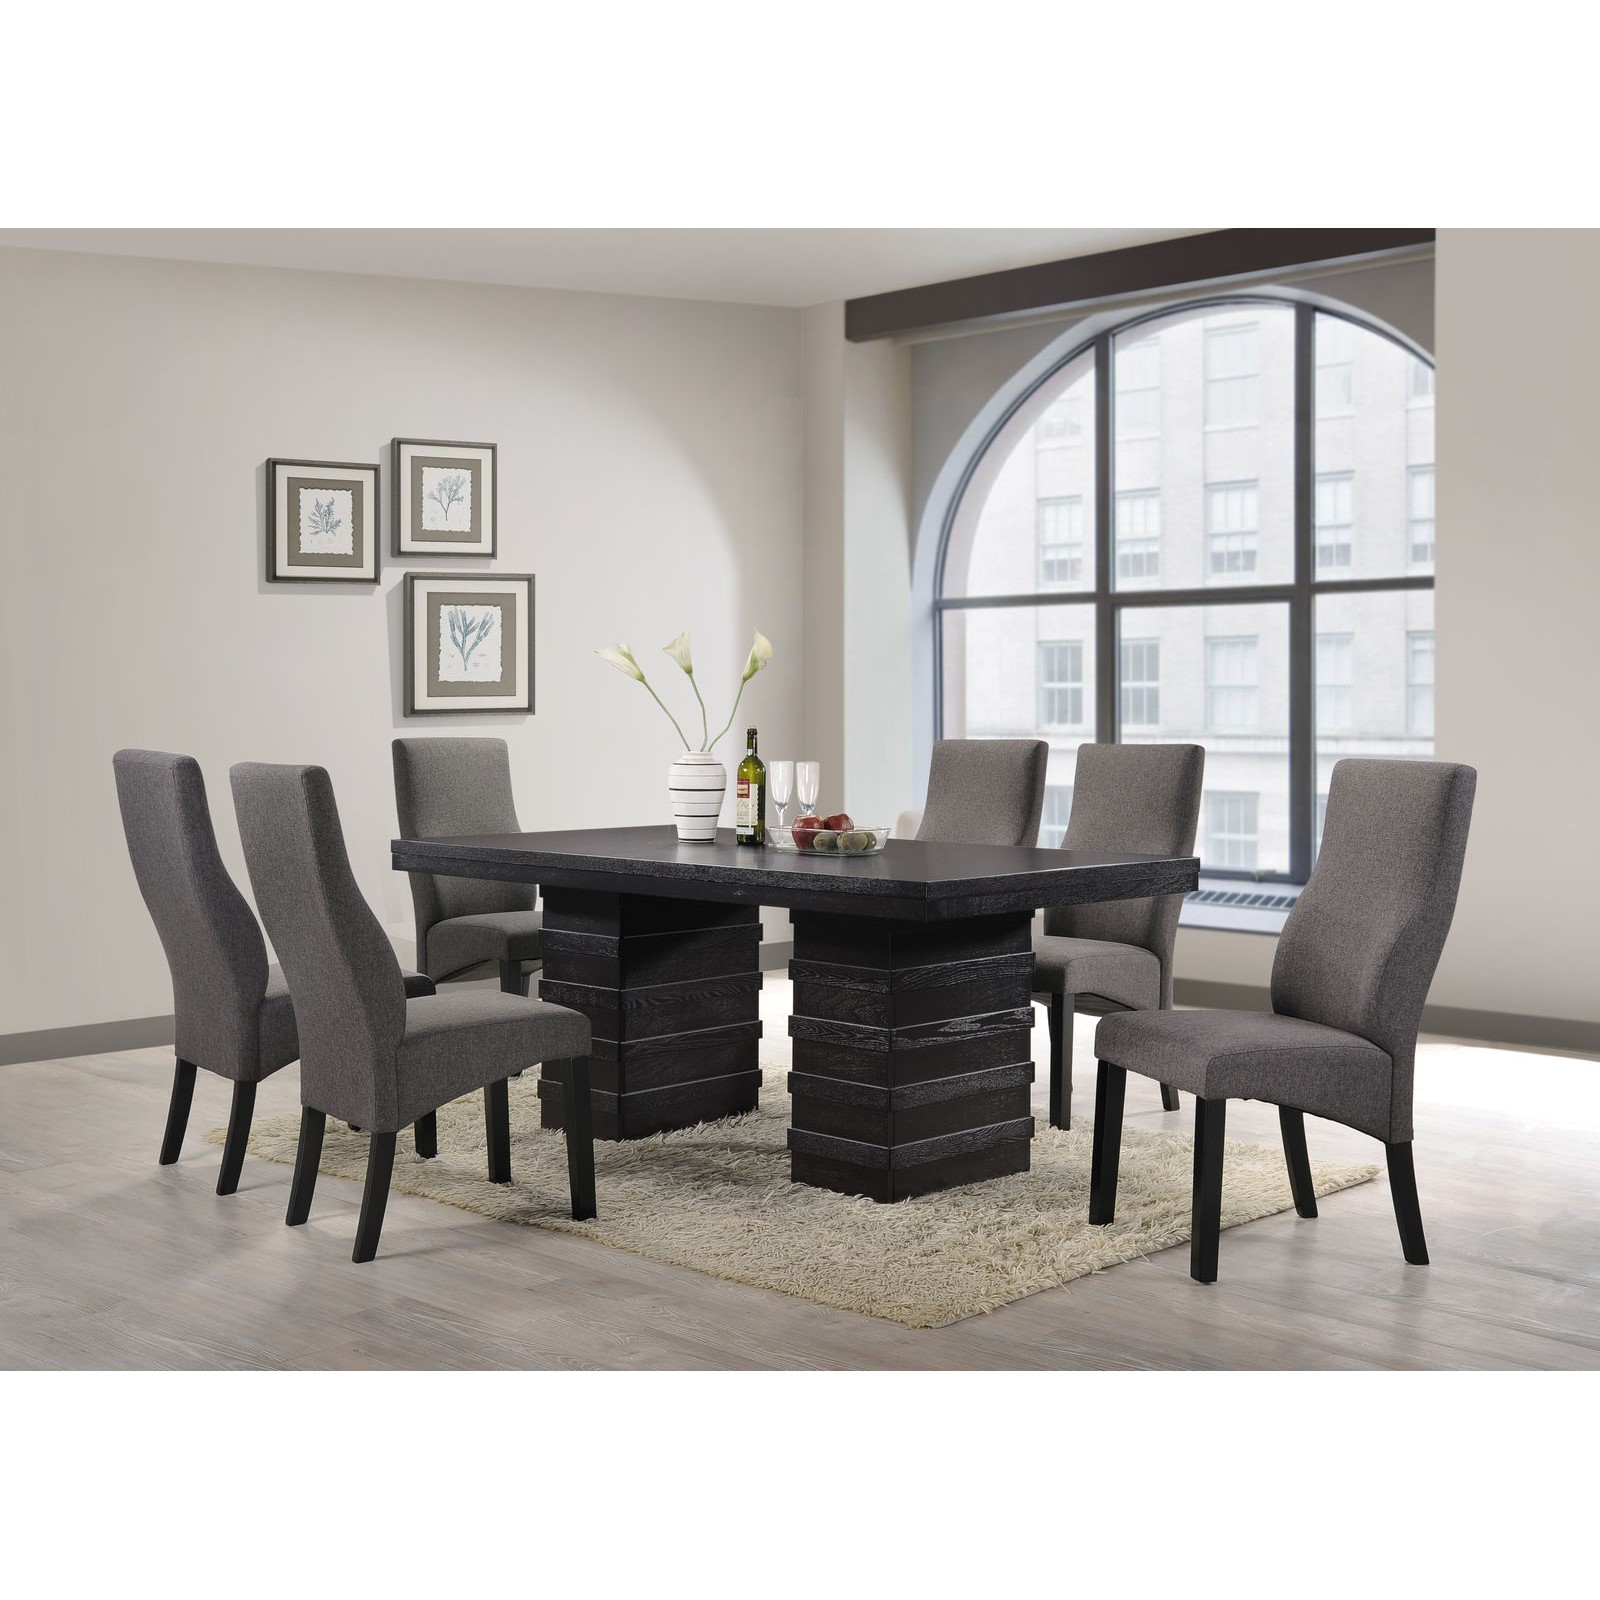 Belle Fontaine Dining Set